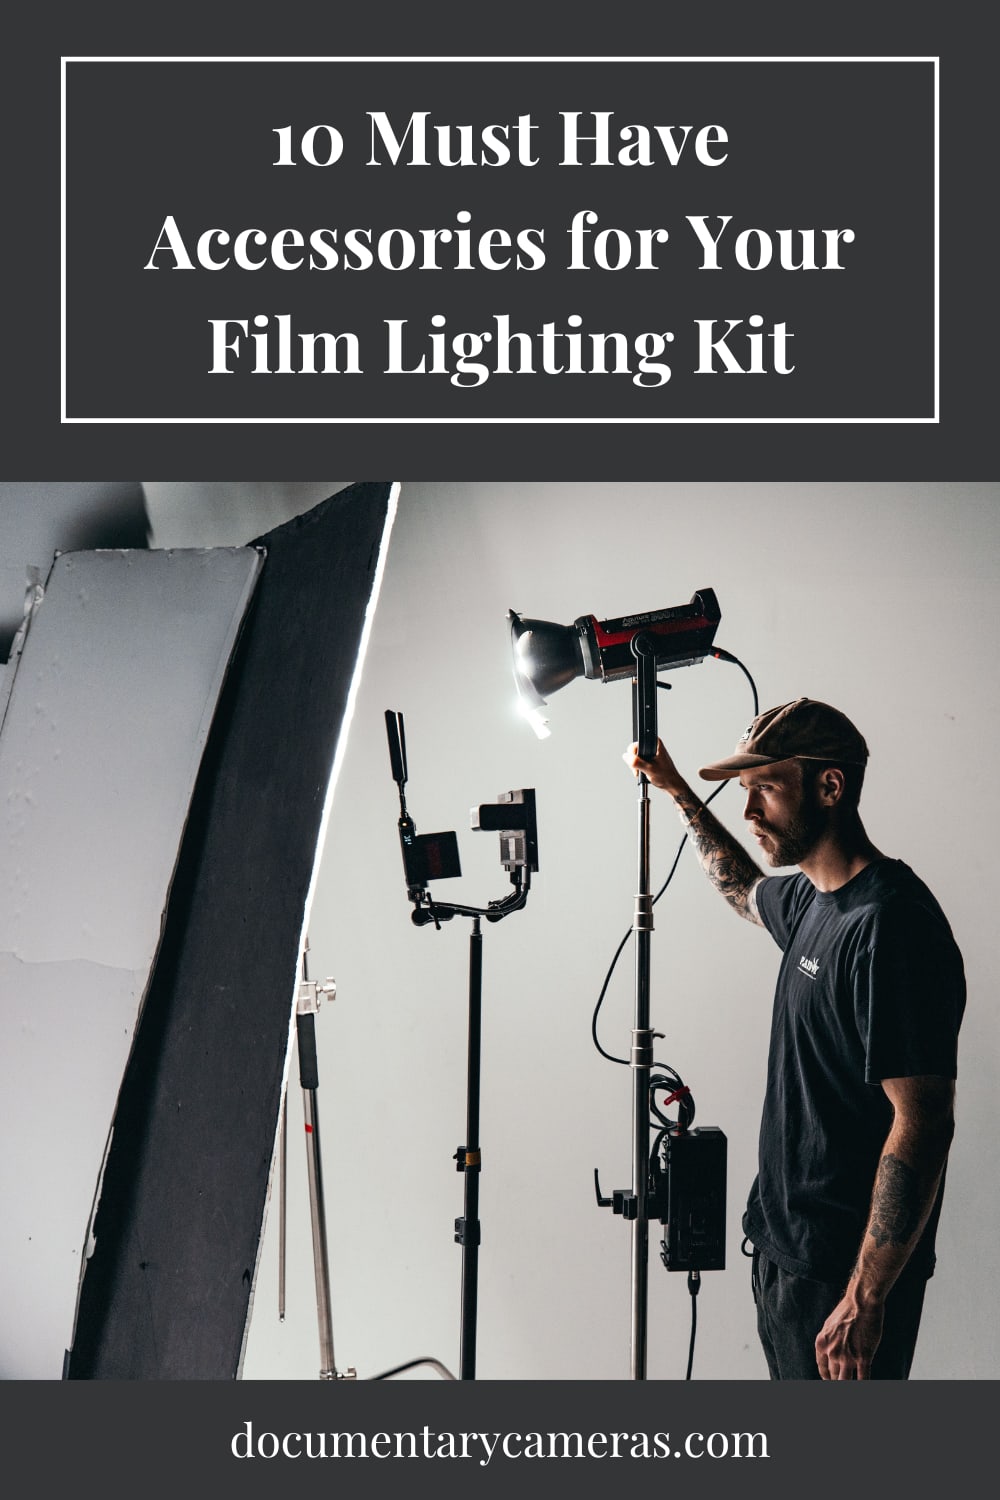 10 Must Have Accessories for Your Film Lighting Kit